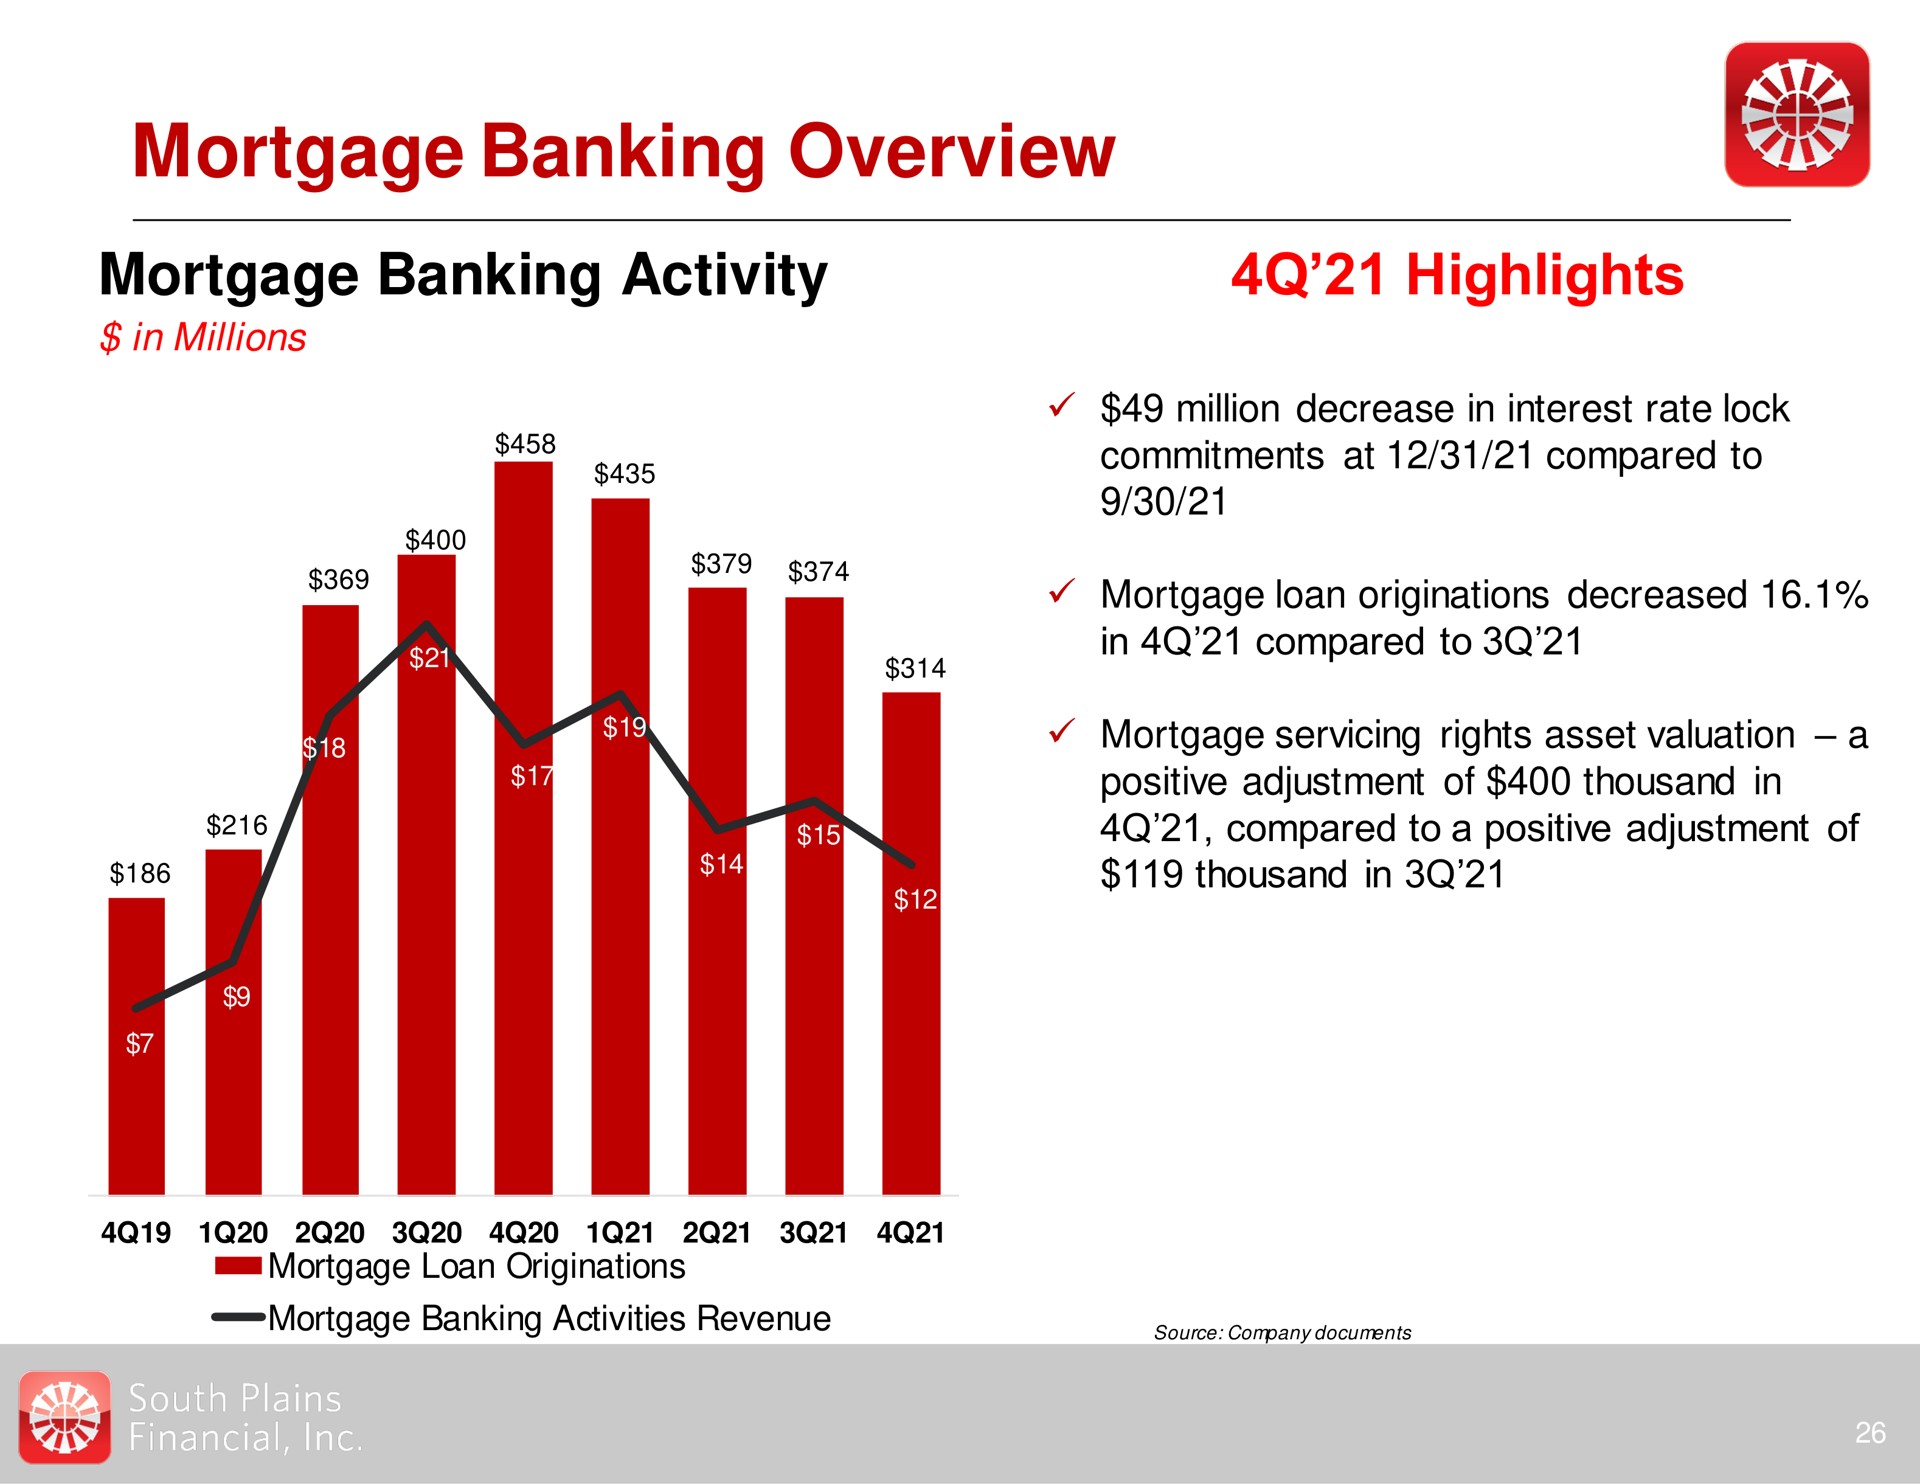 mortgage banking overview mortgage banking activity highlights | South Plains Financial